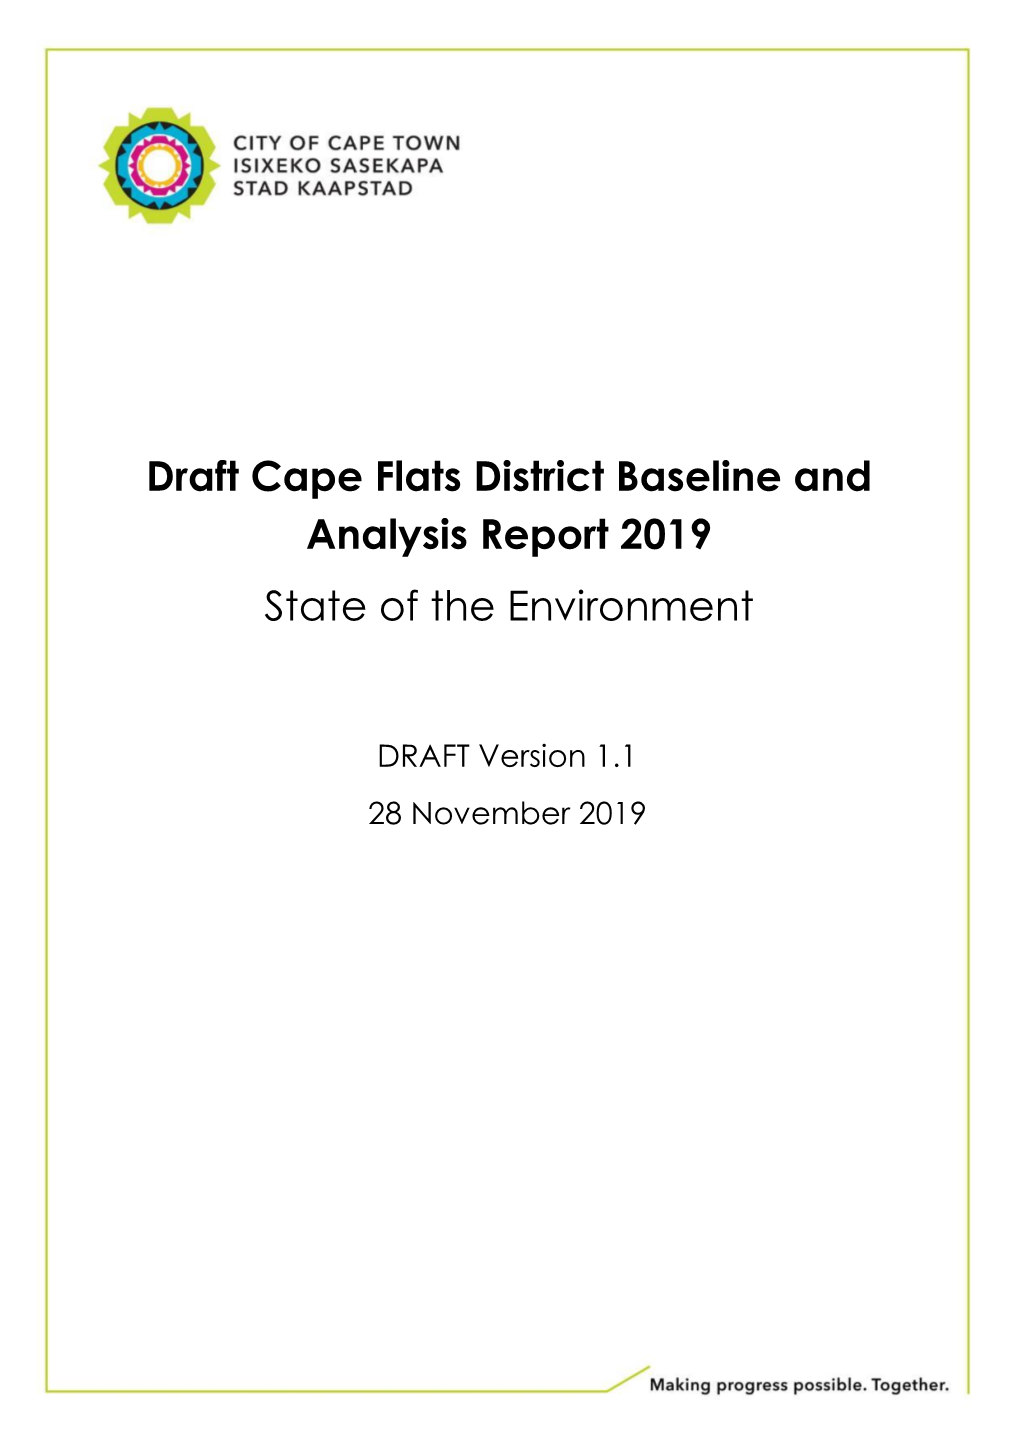 Draft Cape Flats District Baseline and Analysis Report 2019 State of the Environment